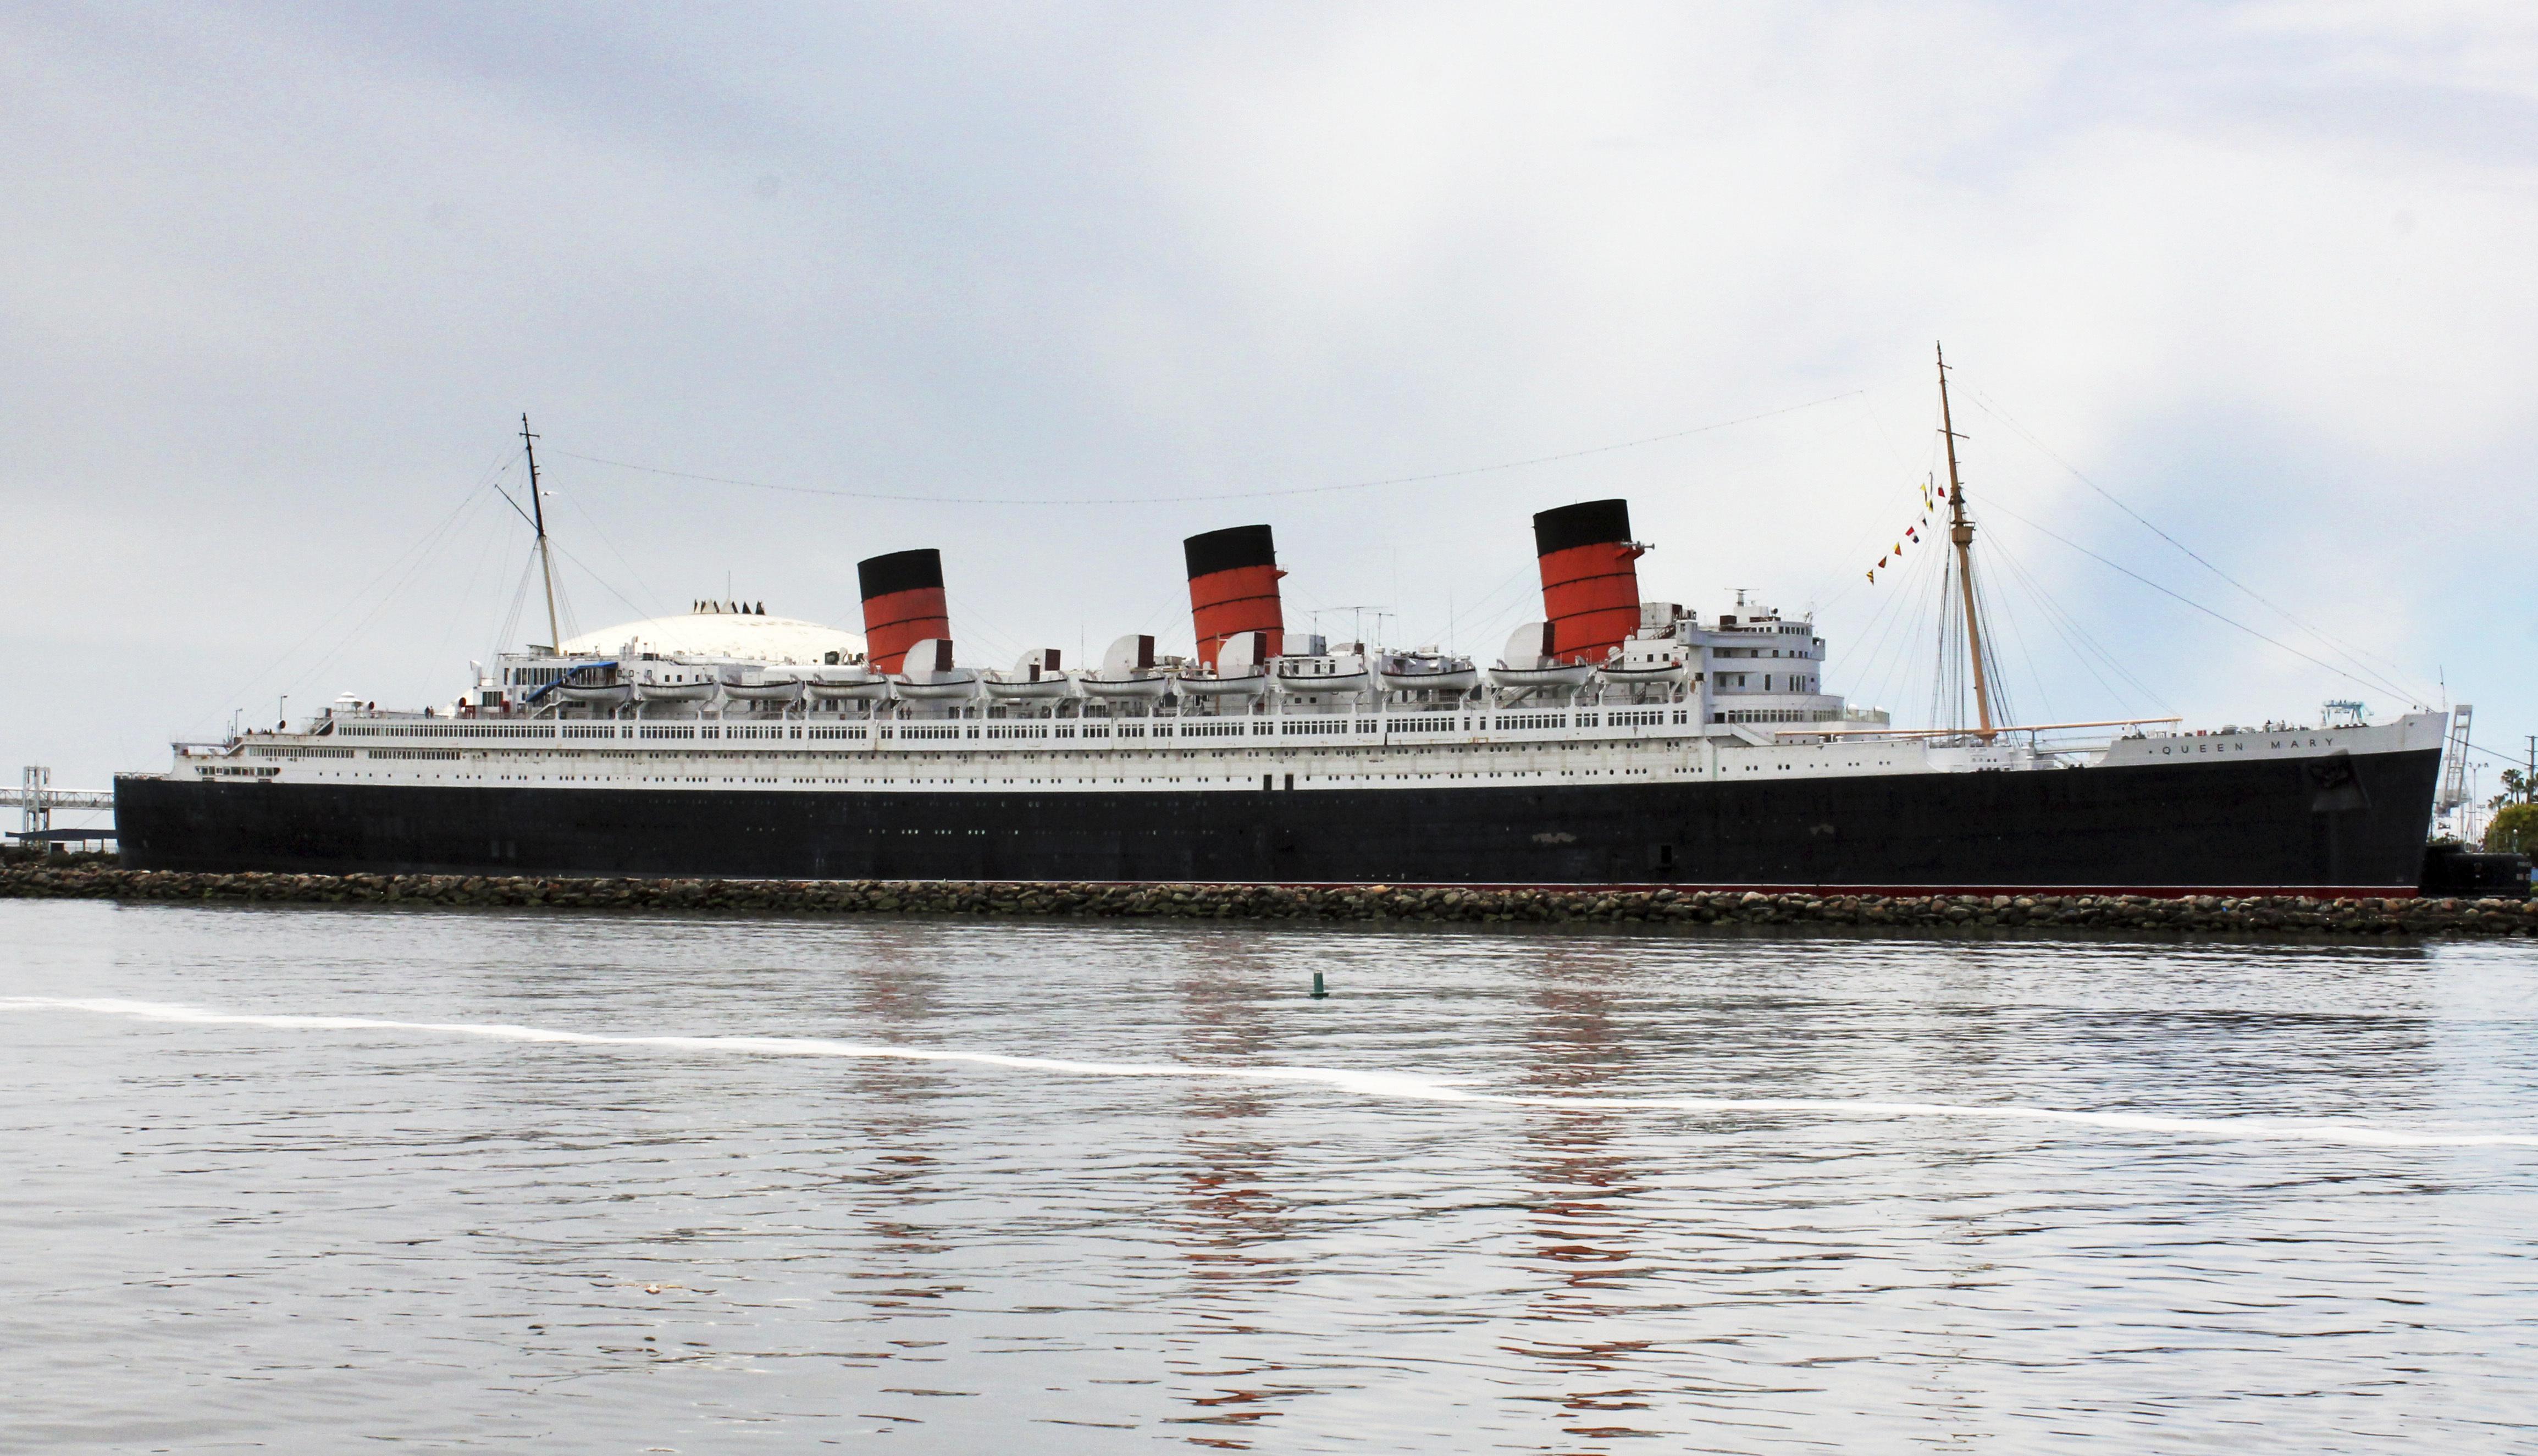 Survey: Queen Mary severely rusted, could cost $300M to fix | The ...